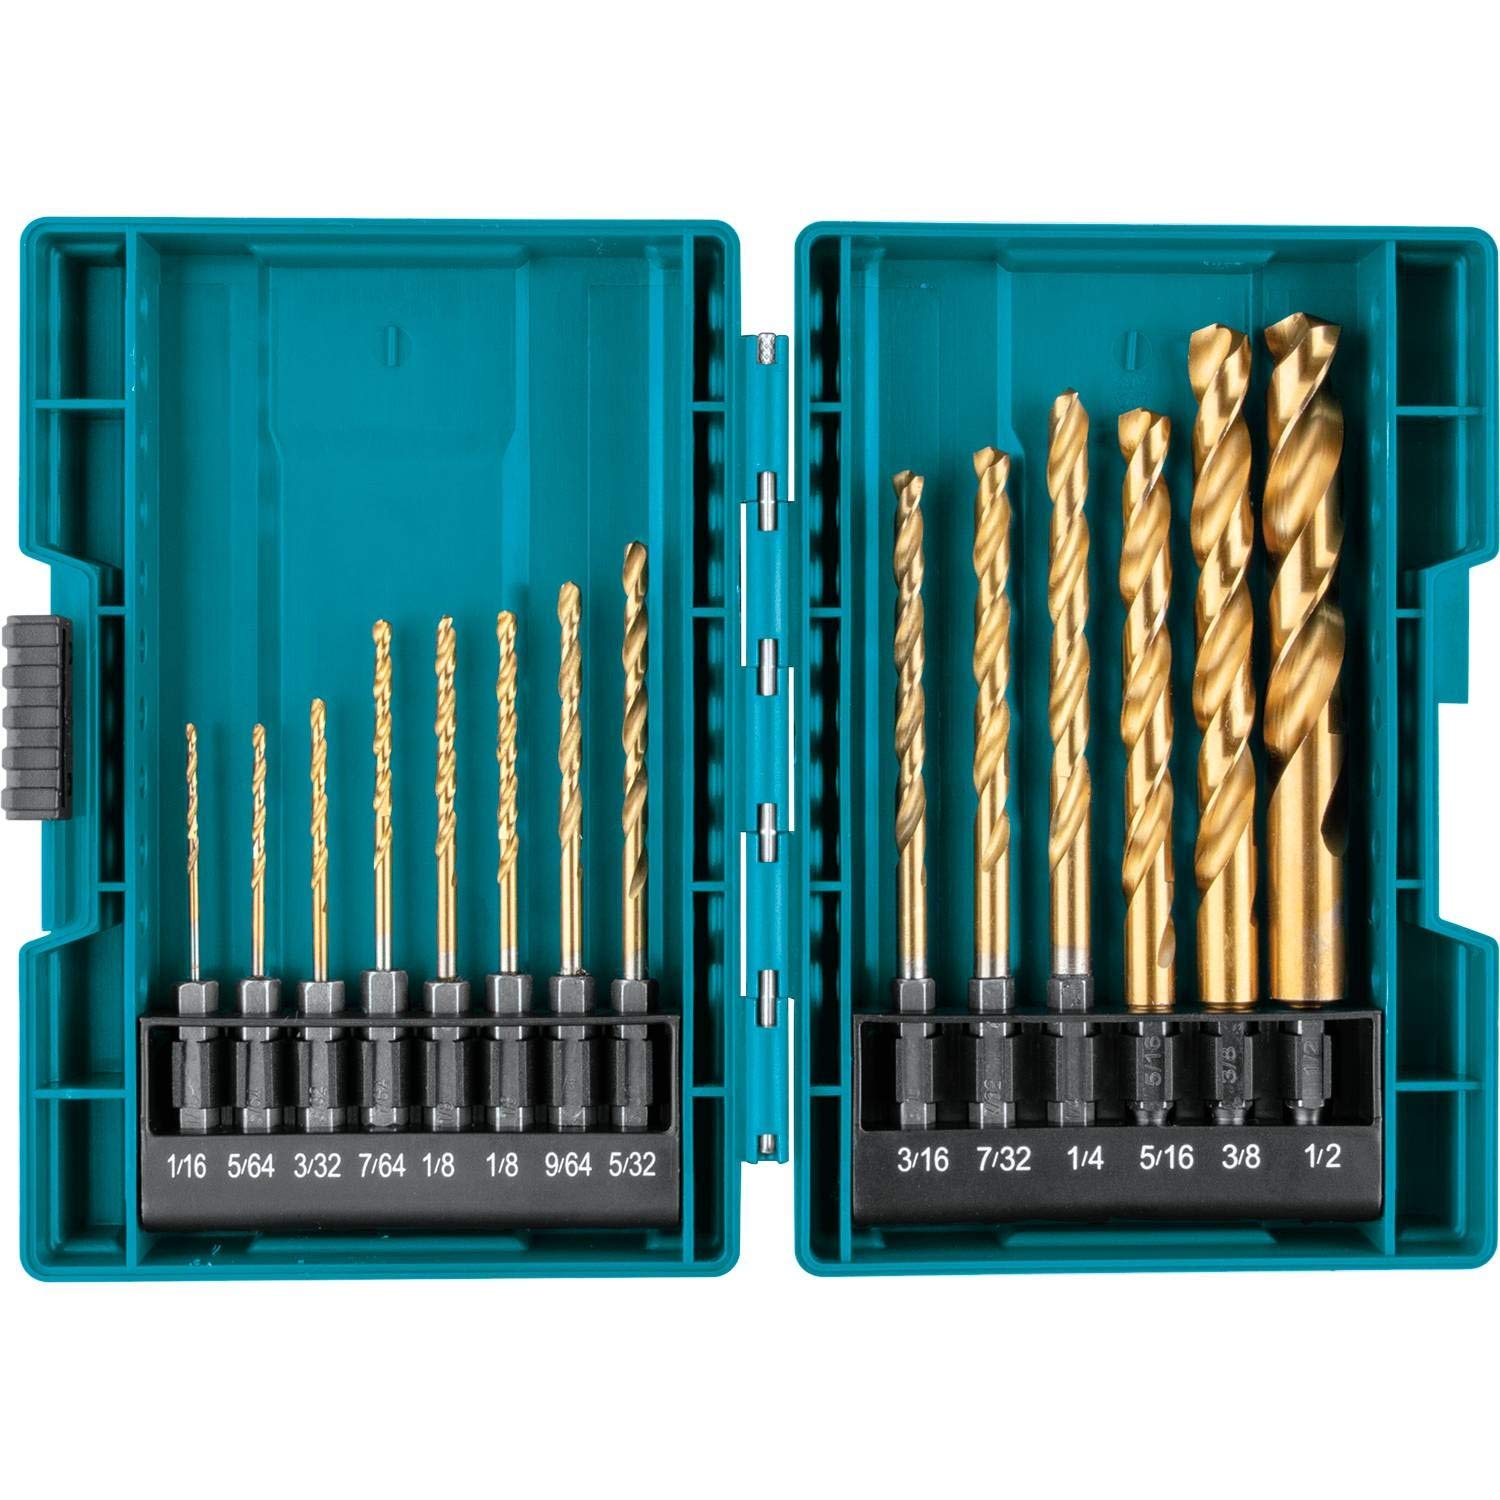 Makita B-65399 Impact Gold 14 Pc. Titanium Coating Drill Bit Set, 1/4 In. Hex Shank $11 + Free Shipping w/ Prime or on $25+